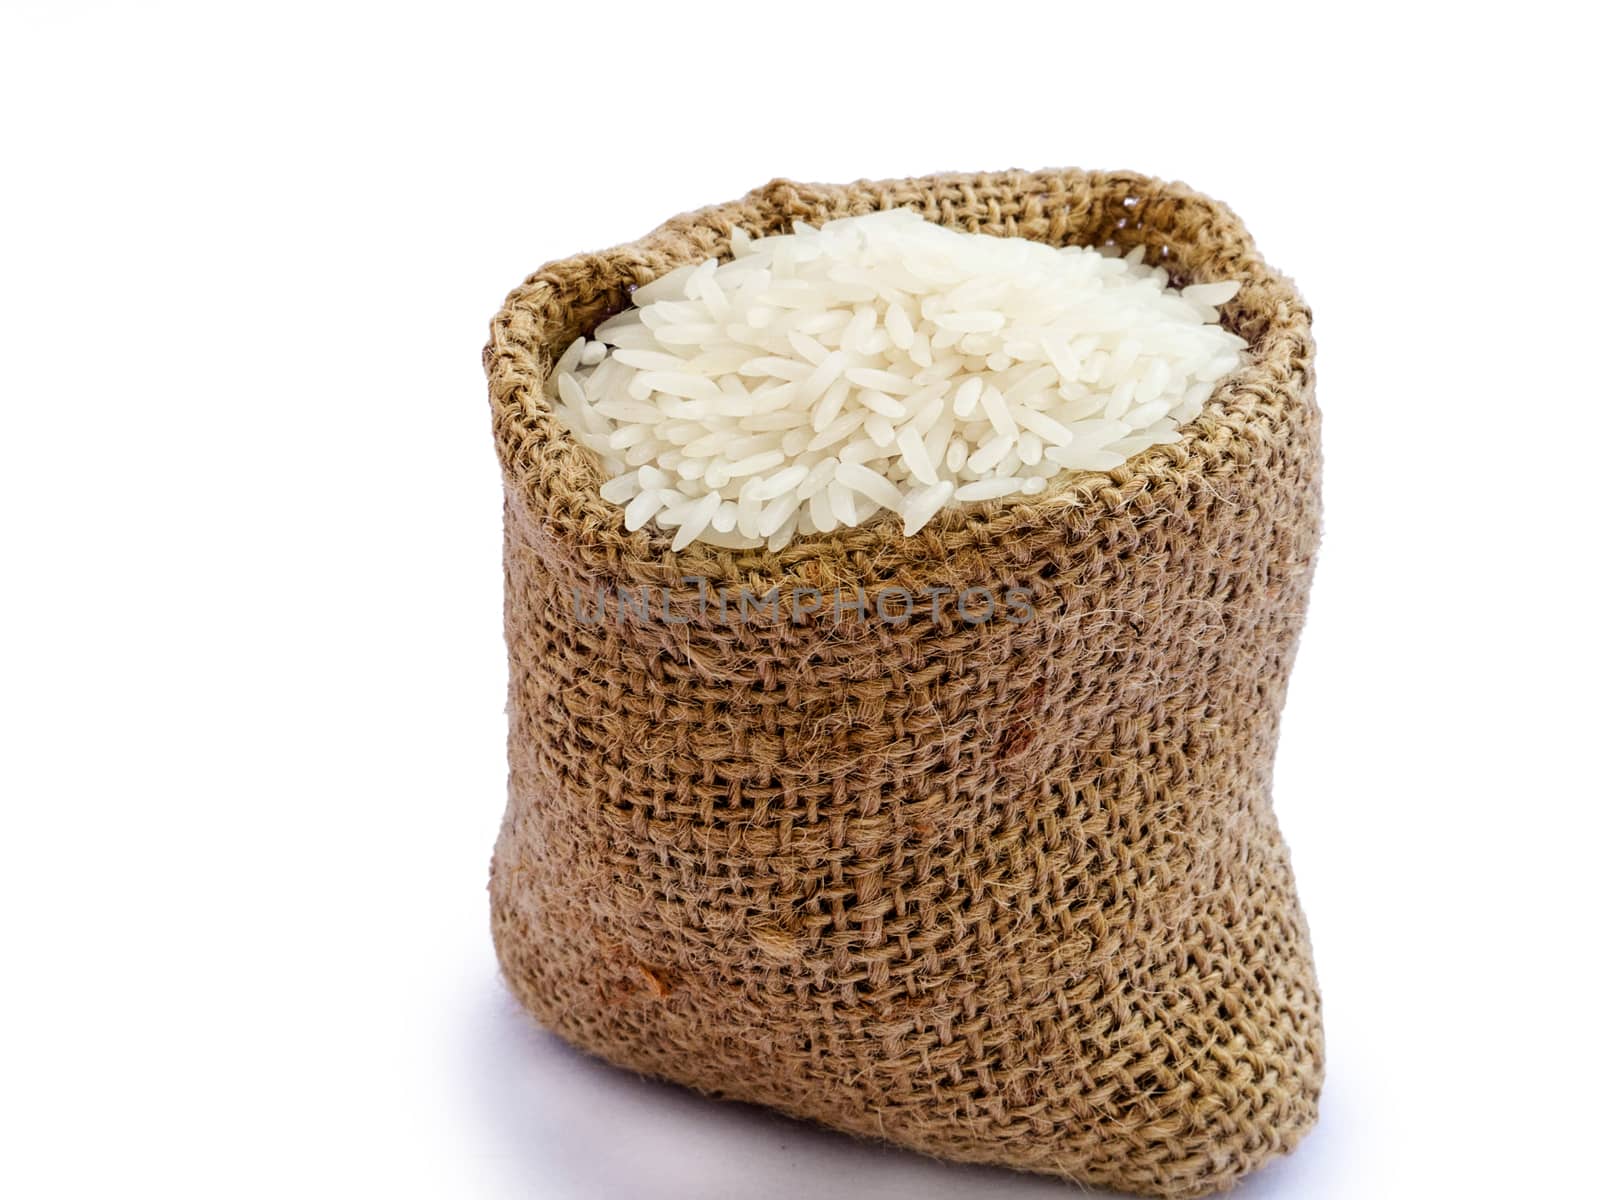 Thai jasmine rice in sack, white rice on burlap sack background with rice grain close up by asiandelight